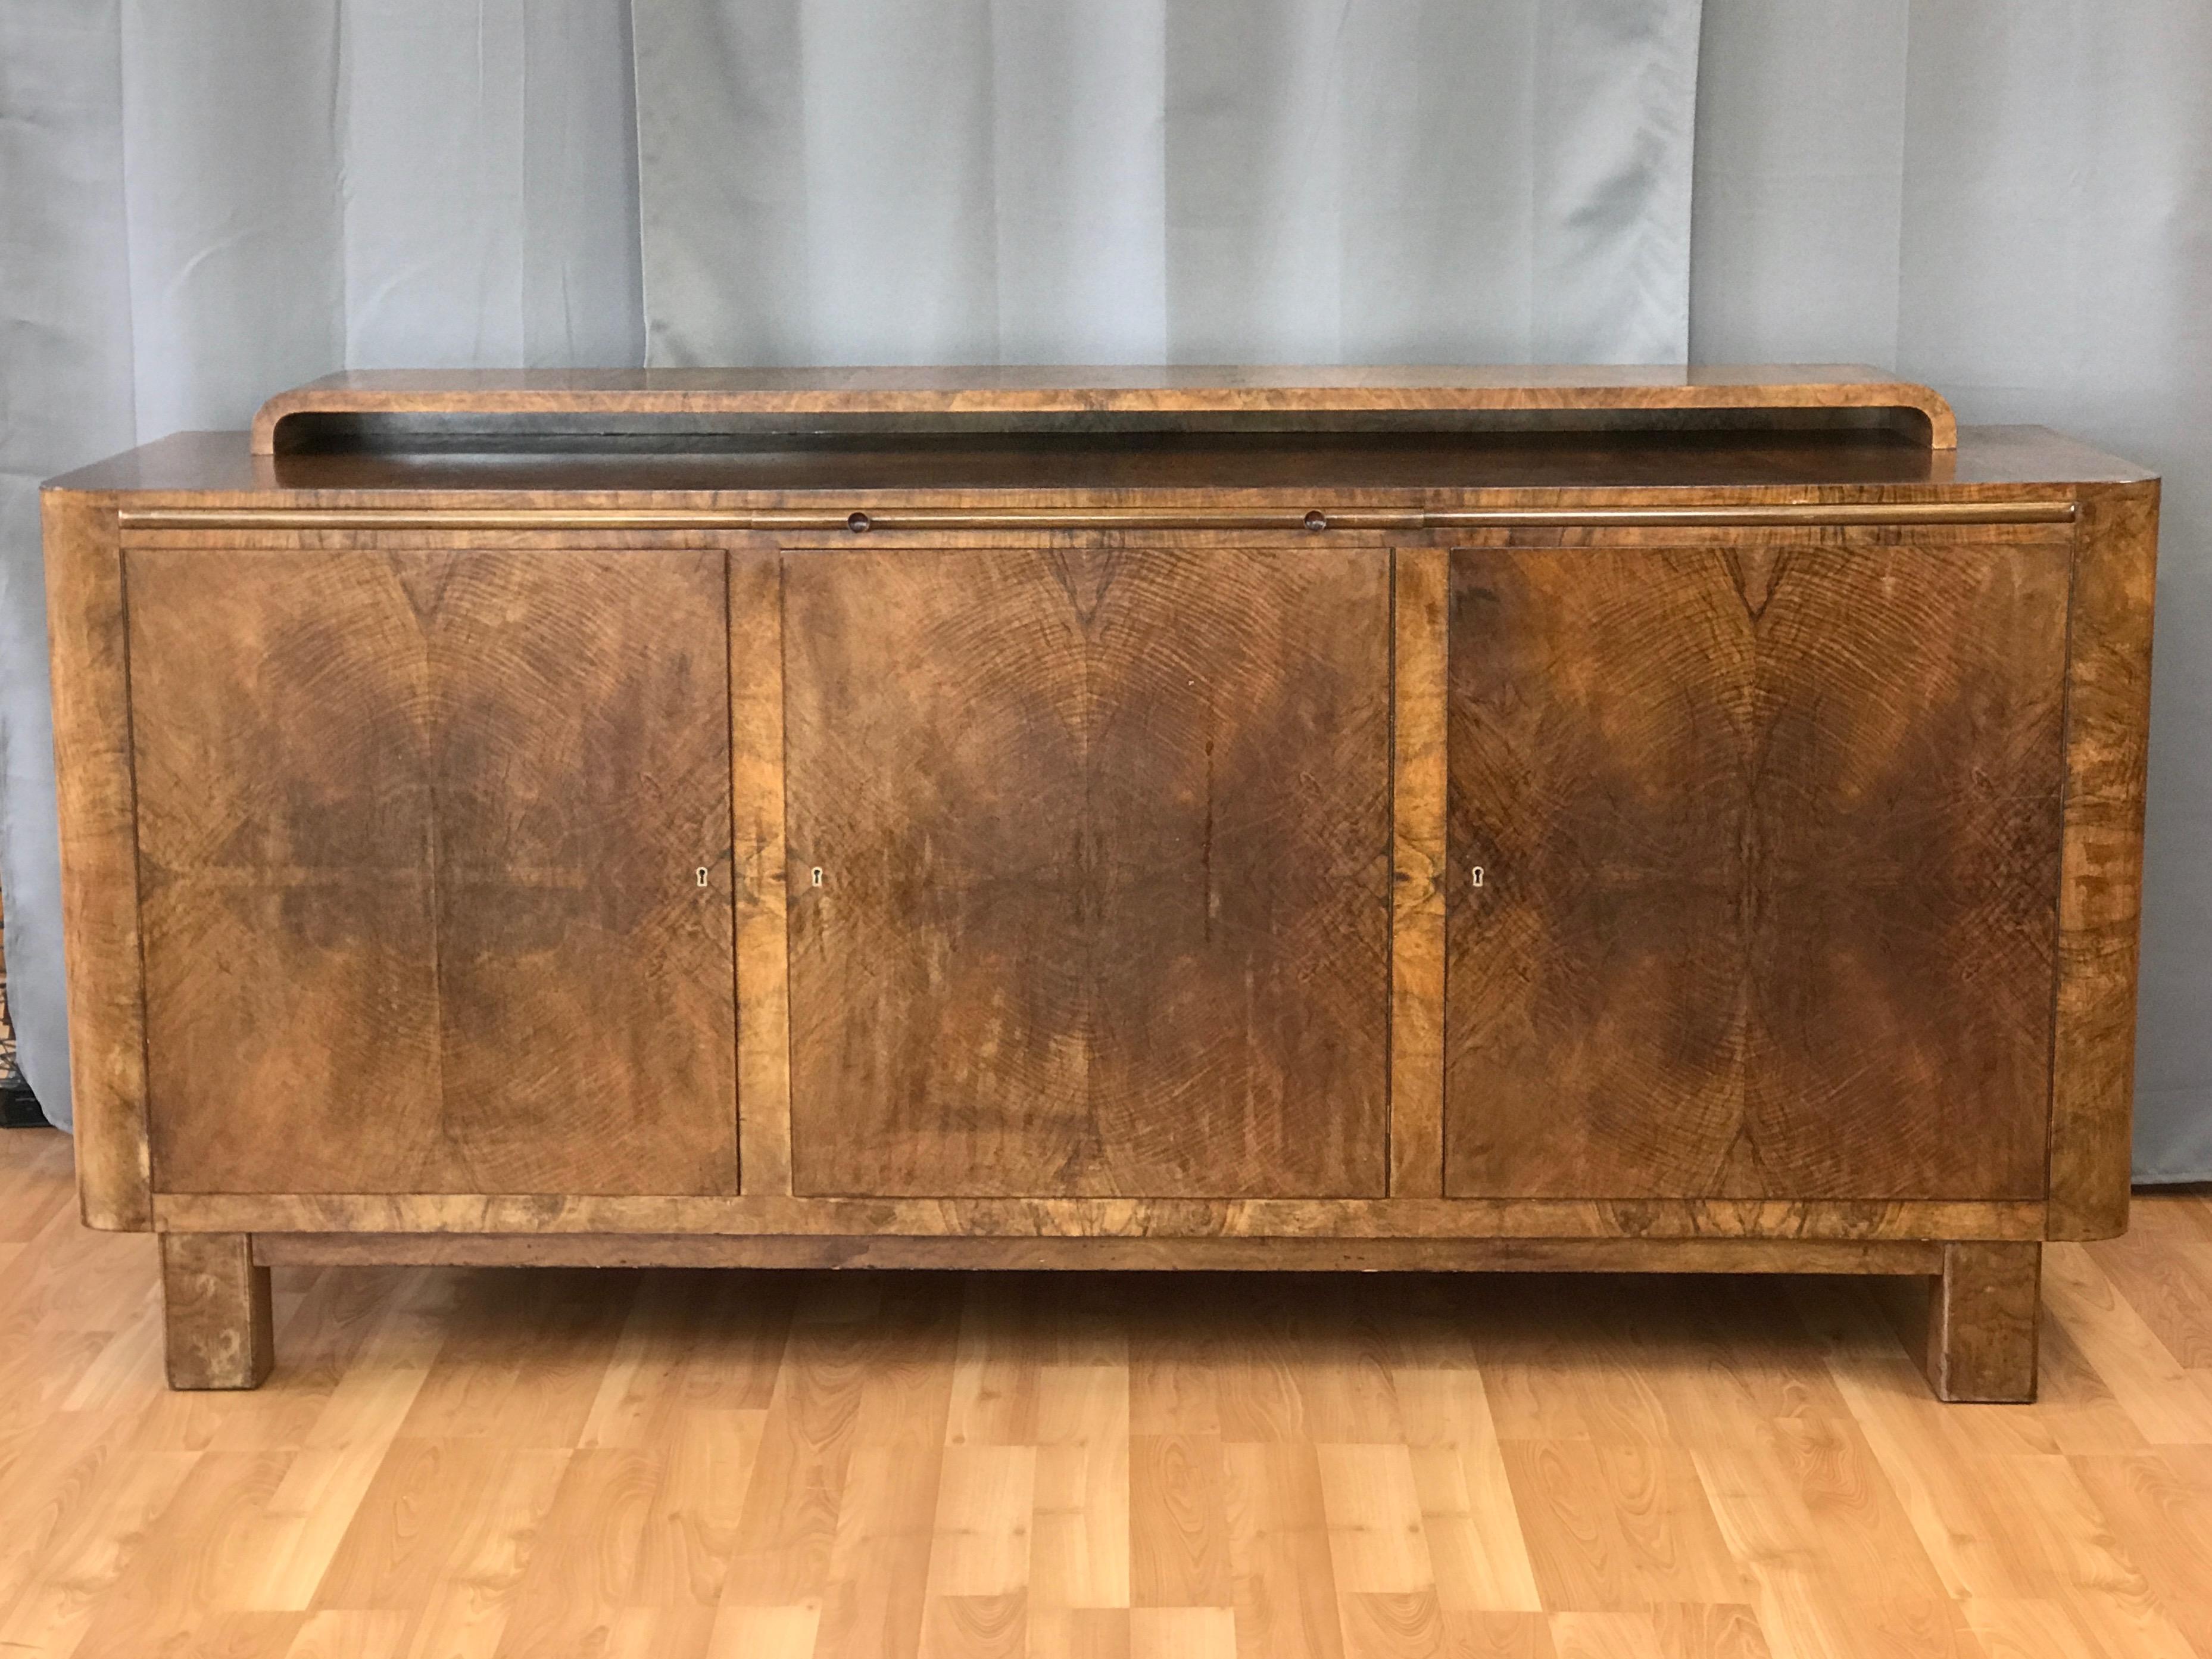 An exceptional and expansive German Art Deco or Art Moderne walnut buffet or sideboard, circa late 1930s-early 1940s.

Streamlined form distinguished by strikingly figured bookmatched curly French walnut veneer. Three spacious locking cabinets (key